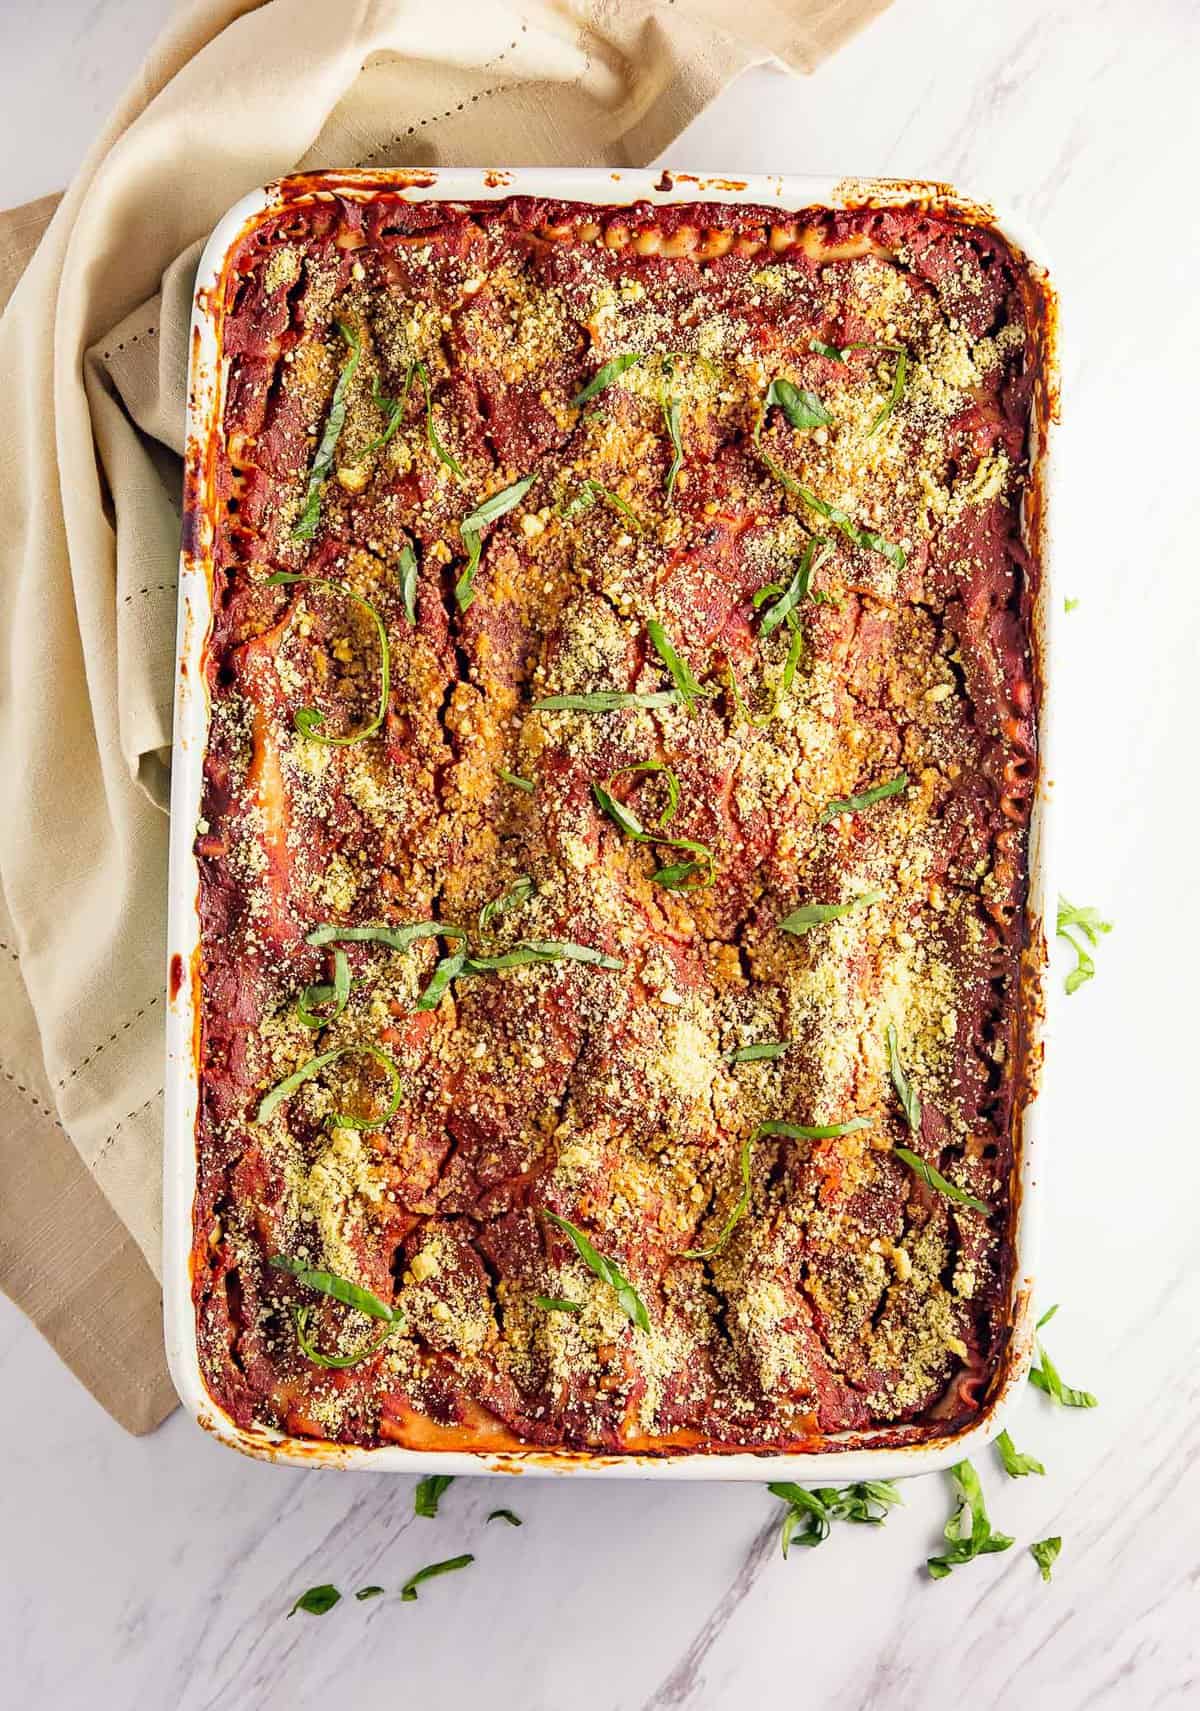 Lasagna, Béchamel and red sauce, marinara, recipe, vegan, vegetarian, whole food plant based, wfpb, gluten free, oil free, refined sugar free, no oil, no refined sugar, no dairy, dinner, lunch, dinner party, entertaining, simple, healthy